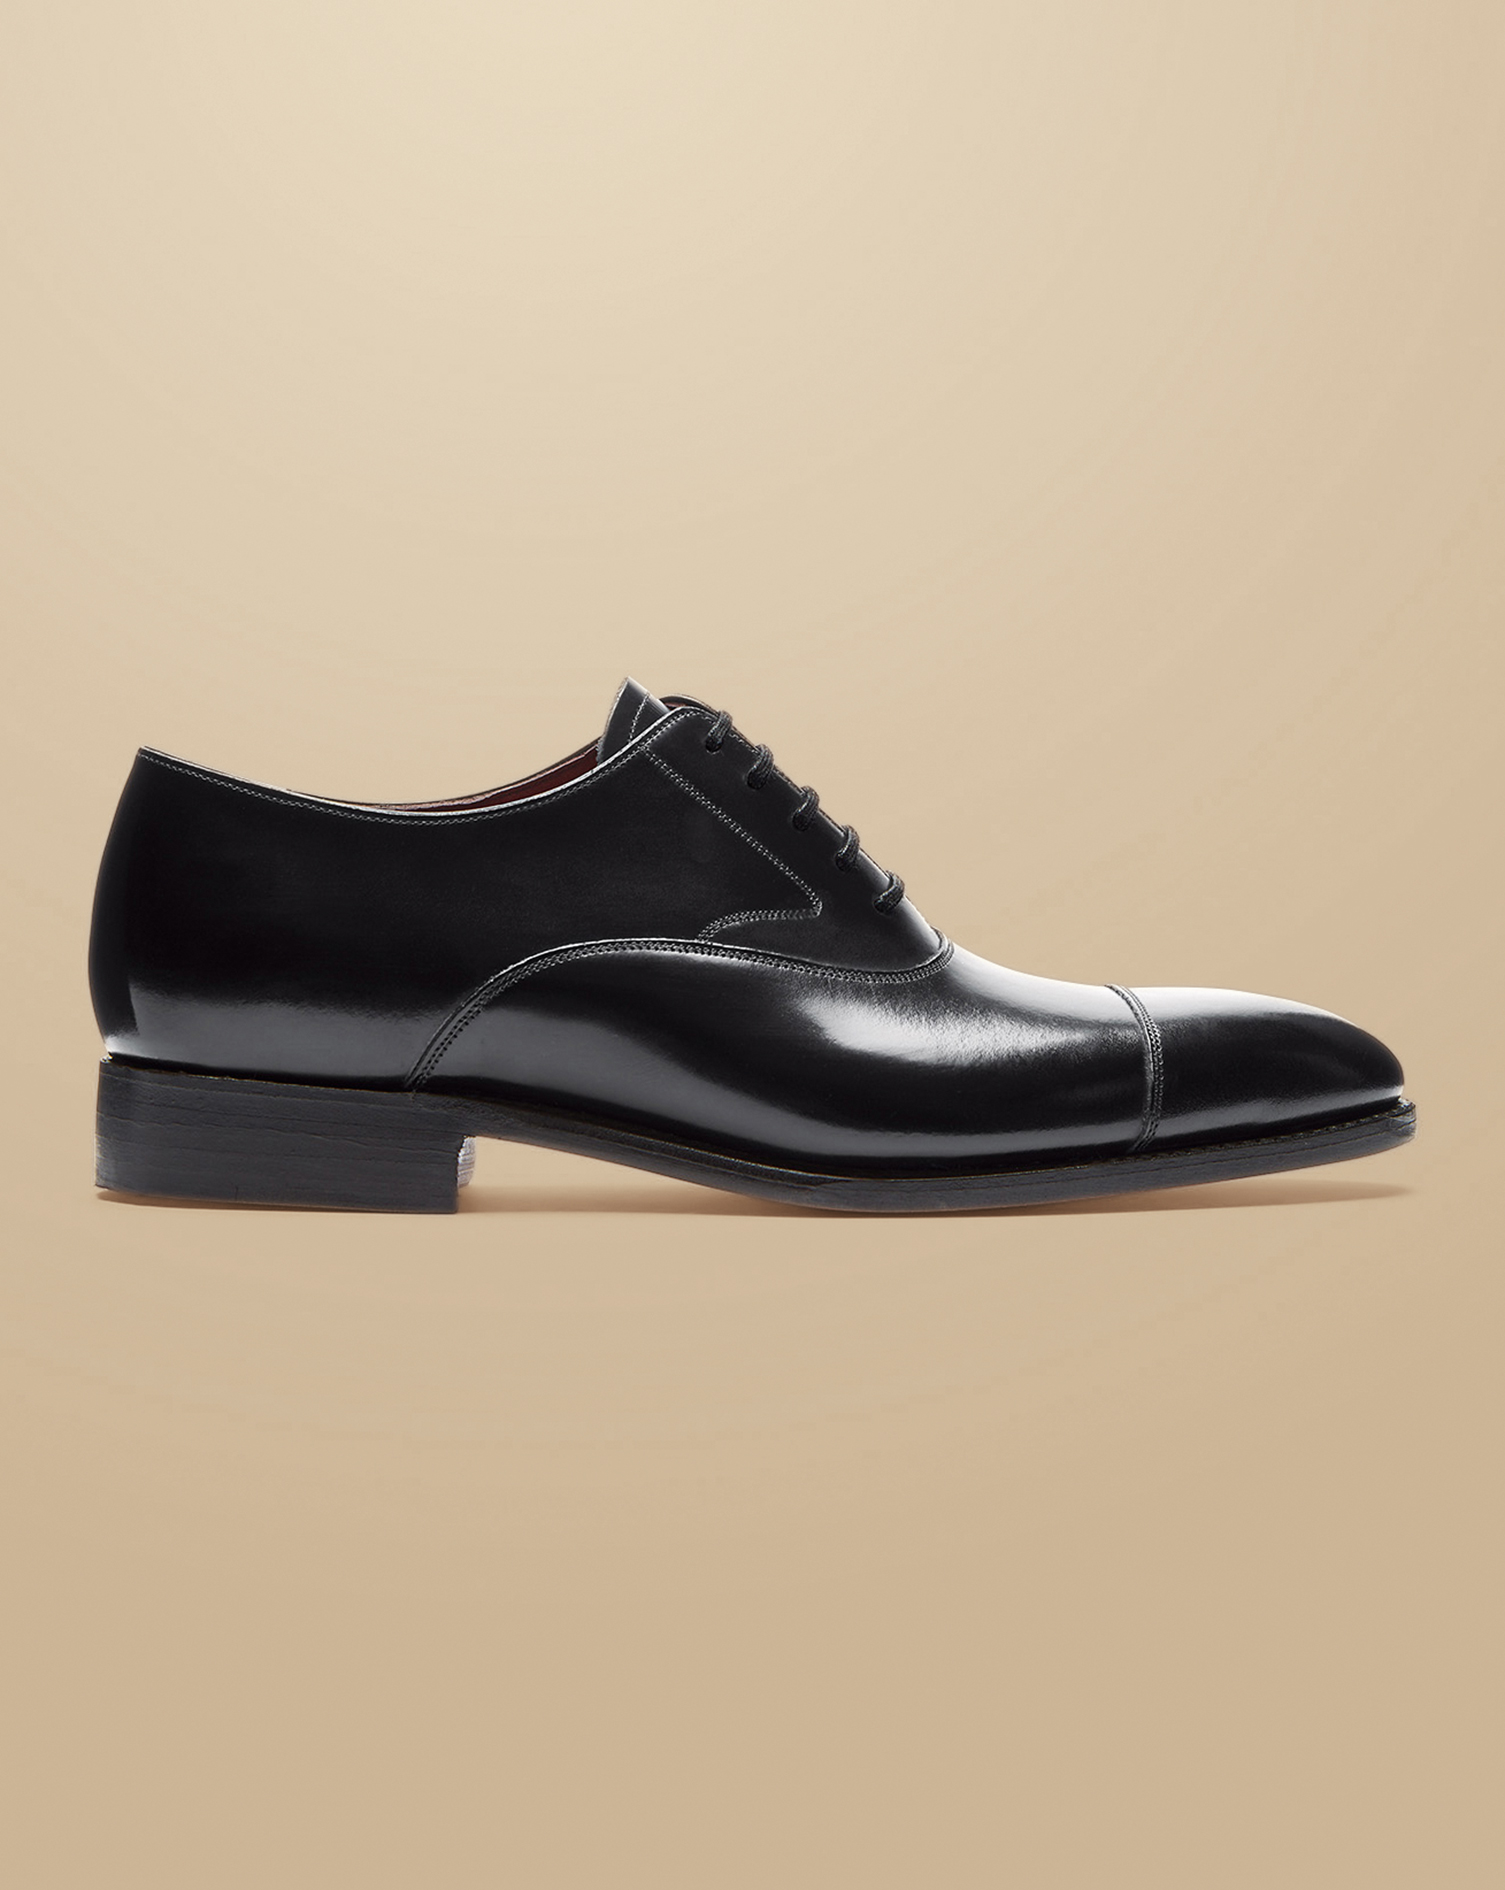 Men's Charles Tyrwhitt Made In England High-Shine Oxford Shoes - Black Size 9.5 Leather
